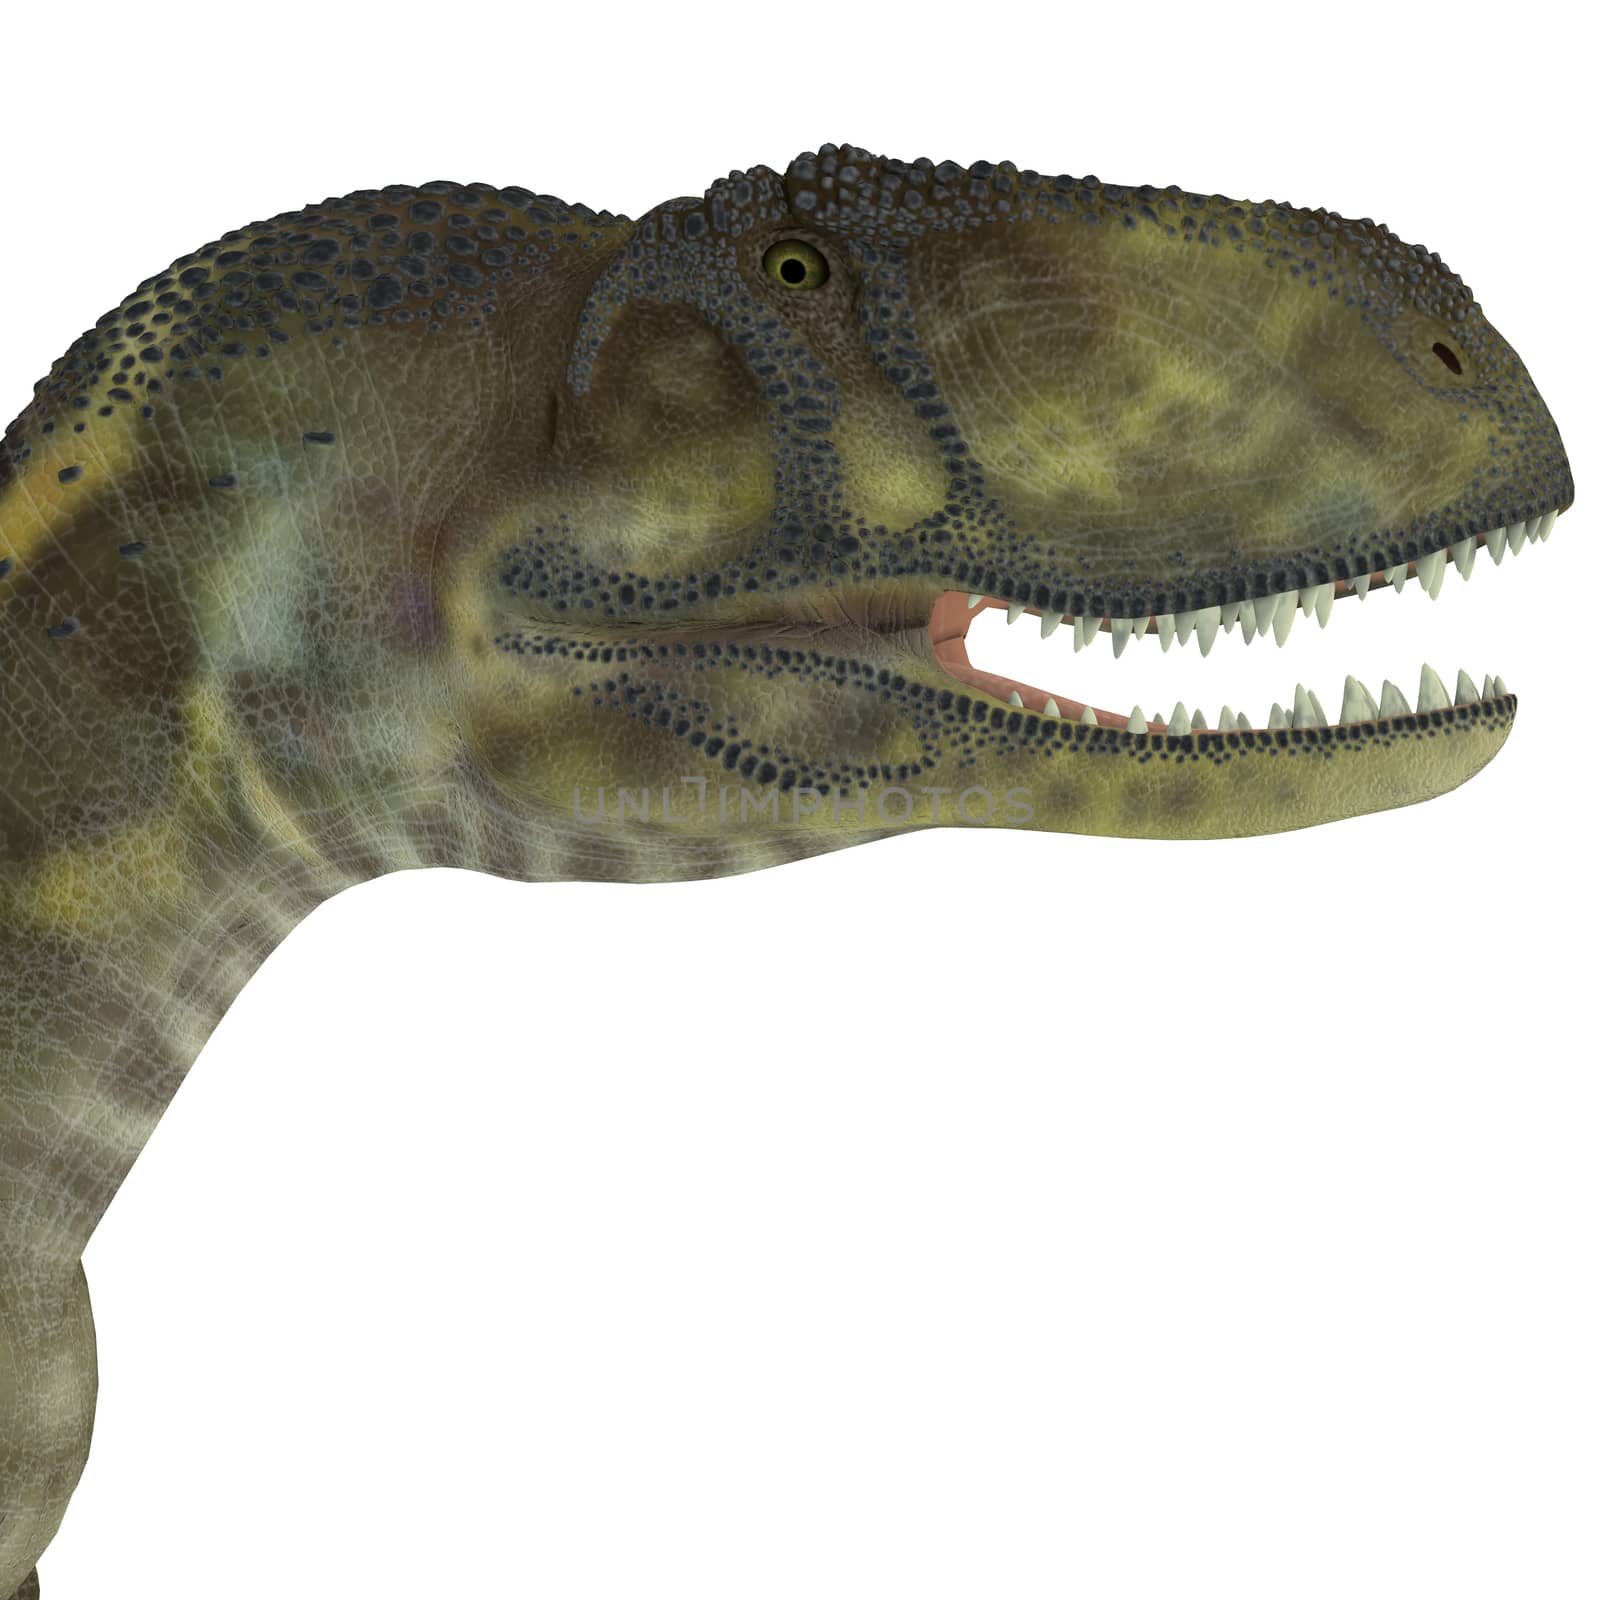 Abelisaurus was a carnivorous theropod dinosaur that lived in the Cretaceous Period of Argentina.